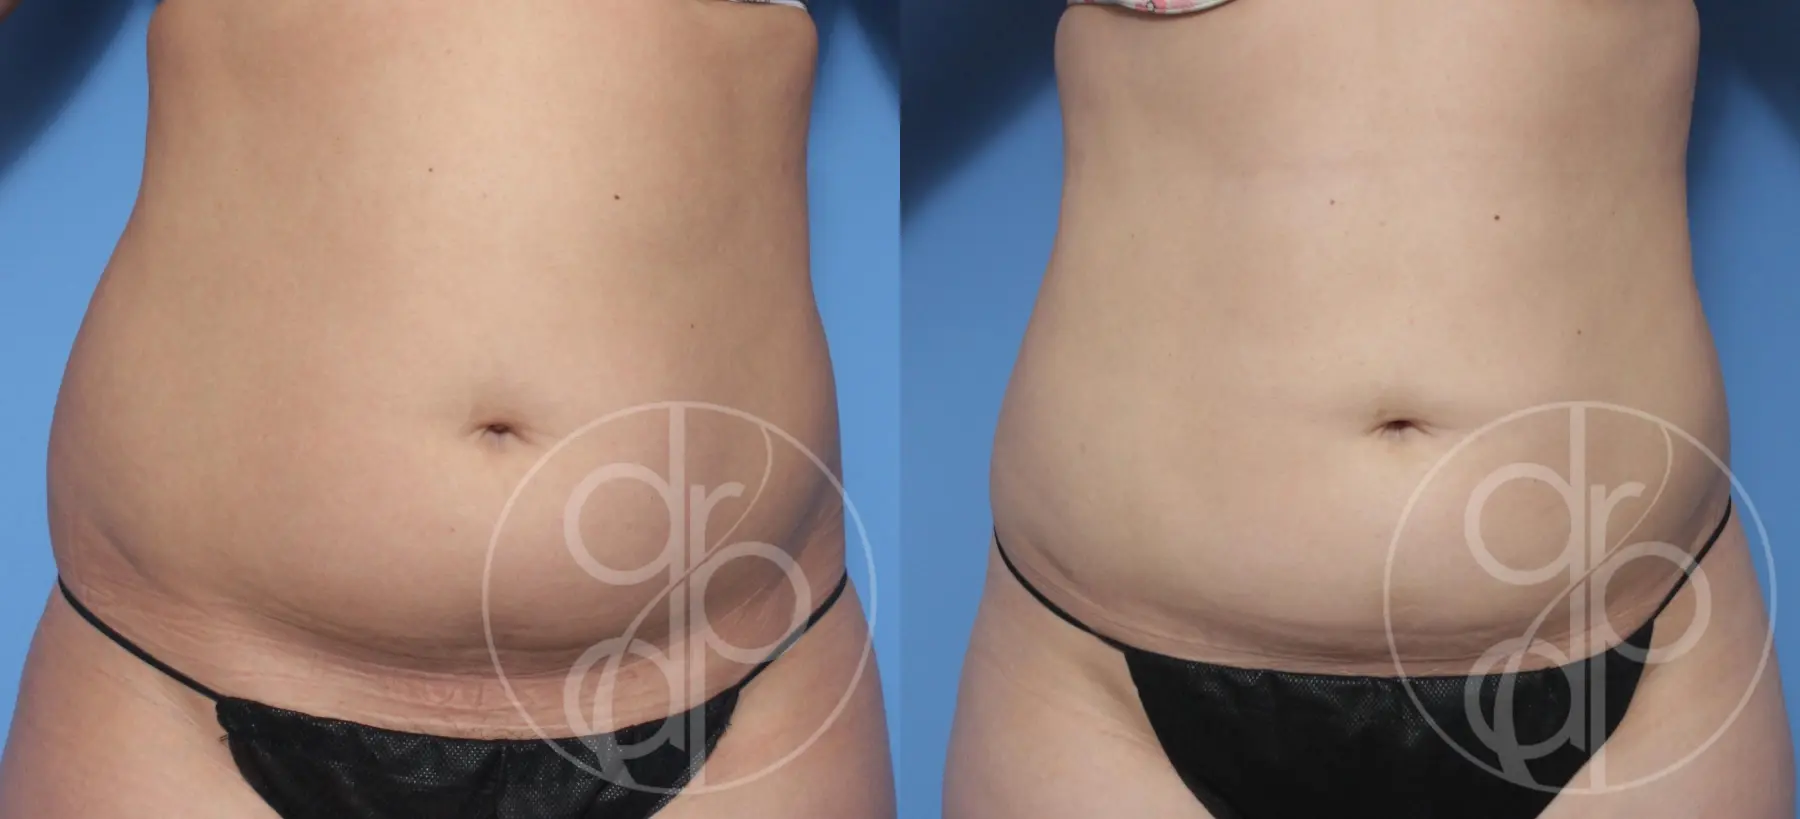 patient 12394 liposuction before and after result - Before and After